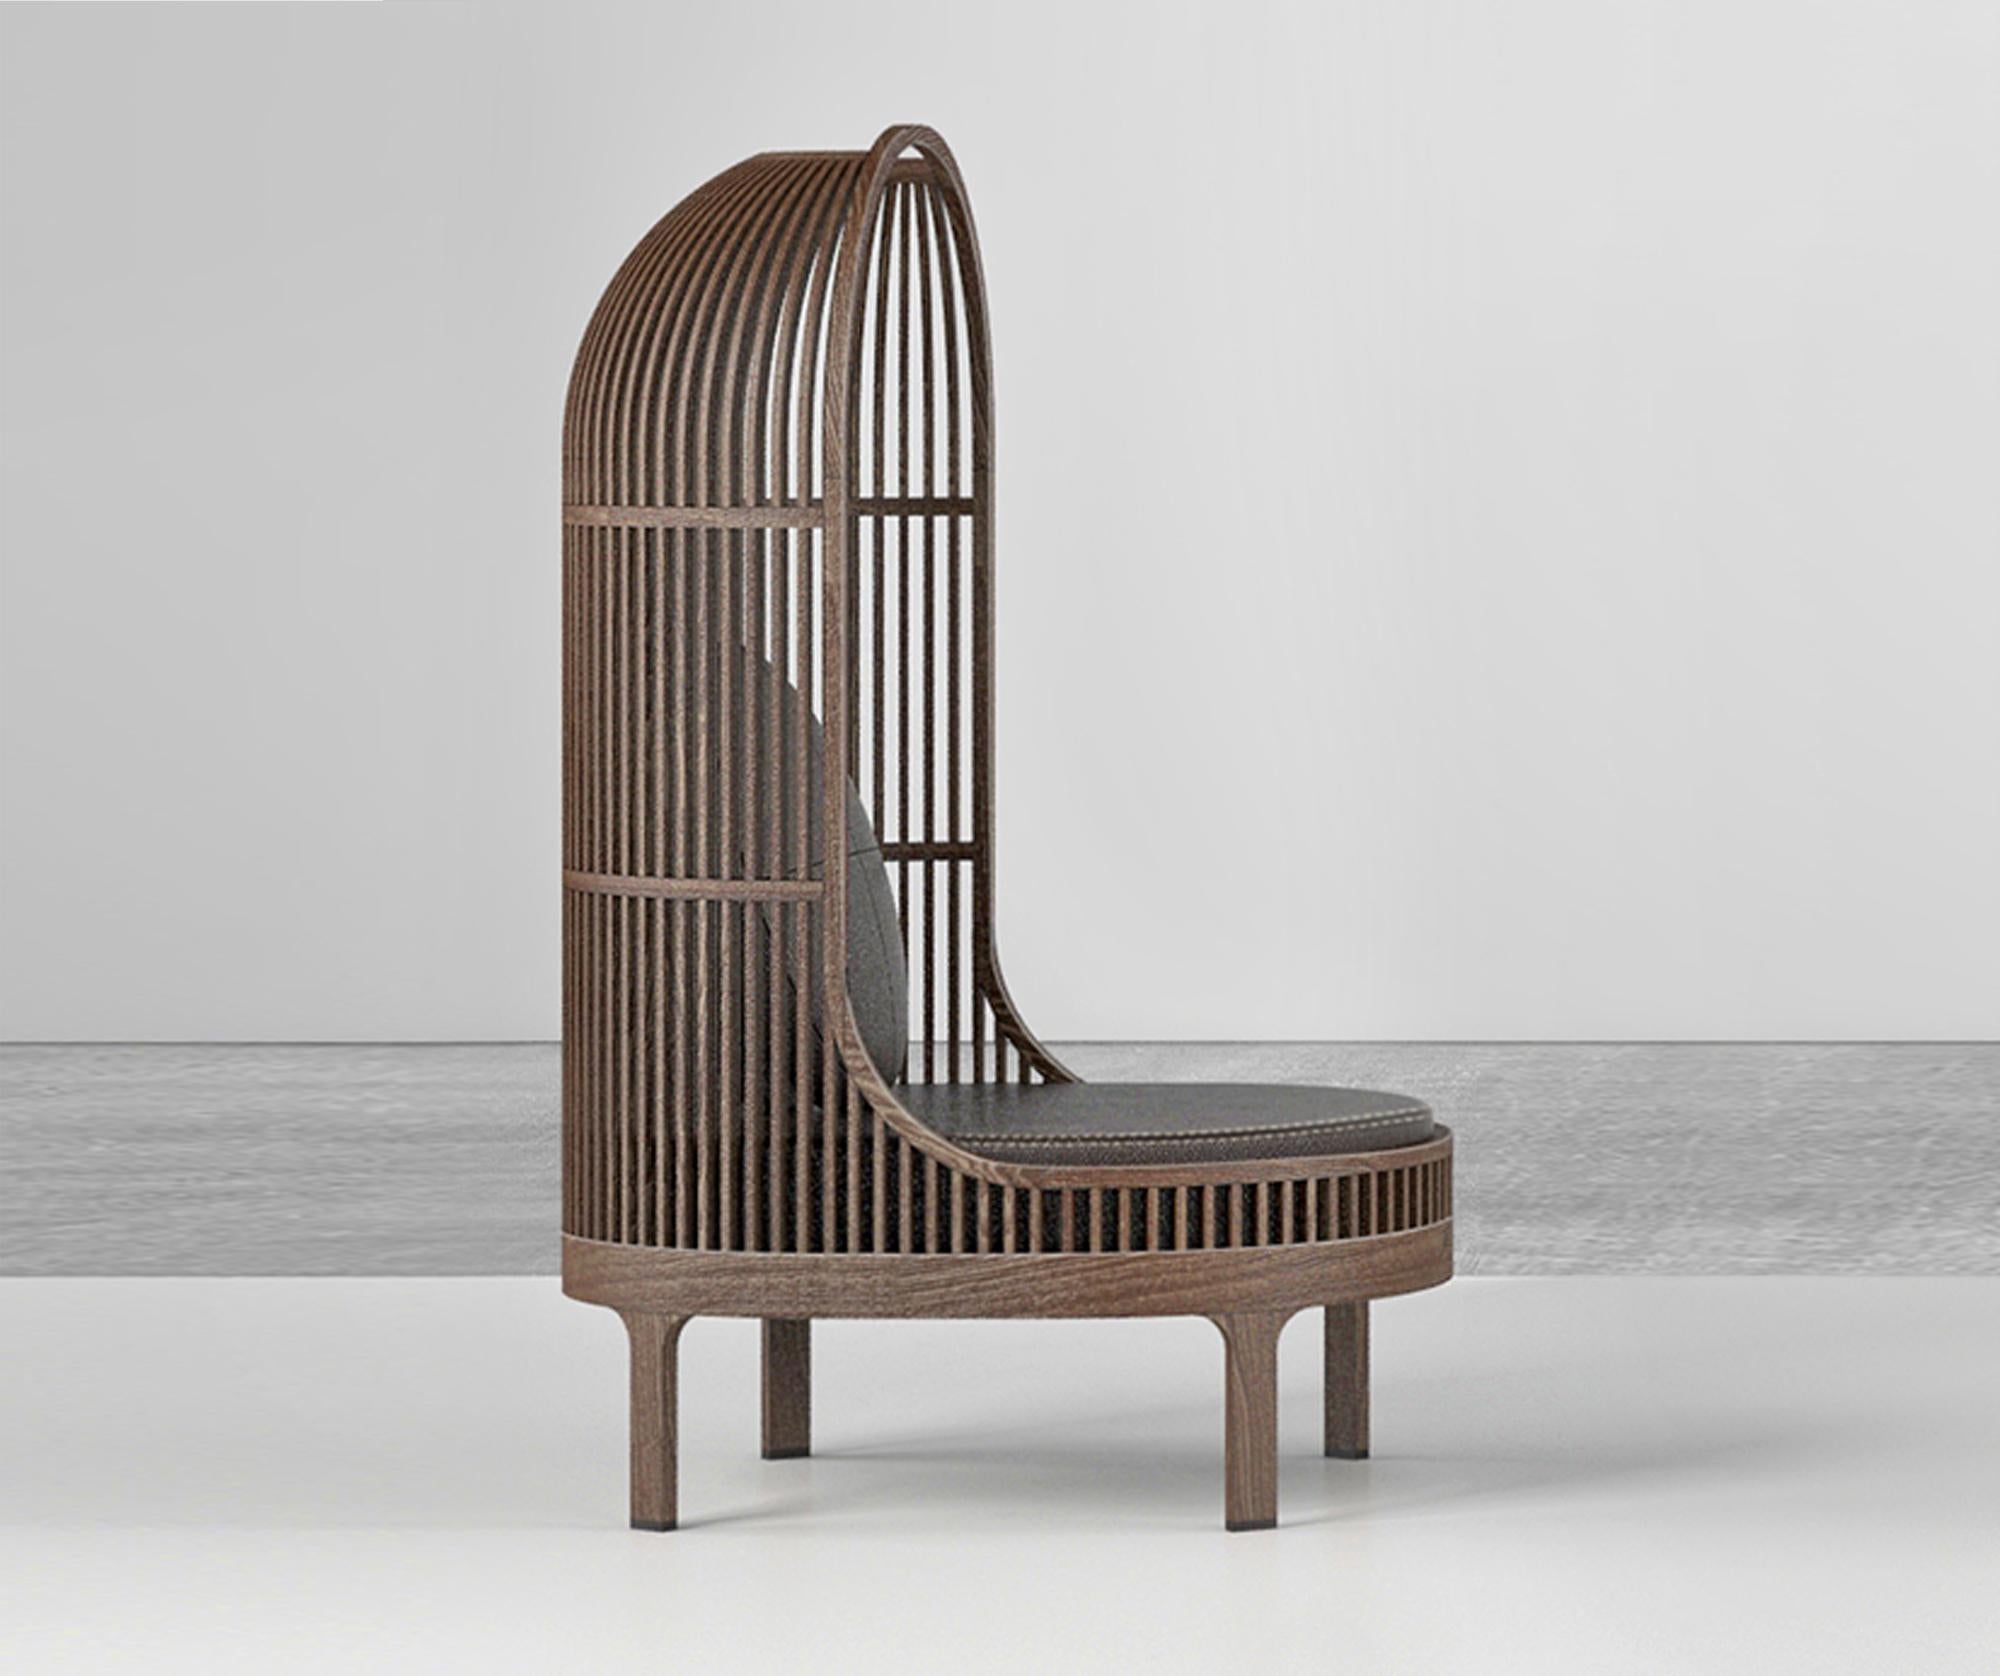 Creating spaces within spaces is a recurring theme in Autoban’s interior work, which can also be clearly observed in the studio’s approach to product design, particularly at the Nest series with the products’ tall, cage-like wooden slats creating a